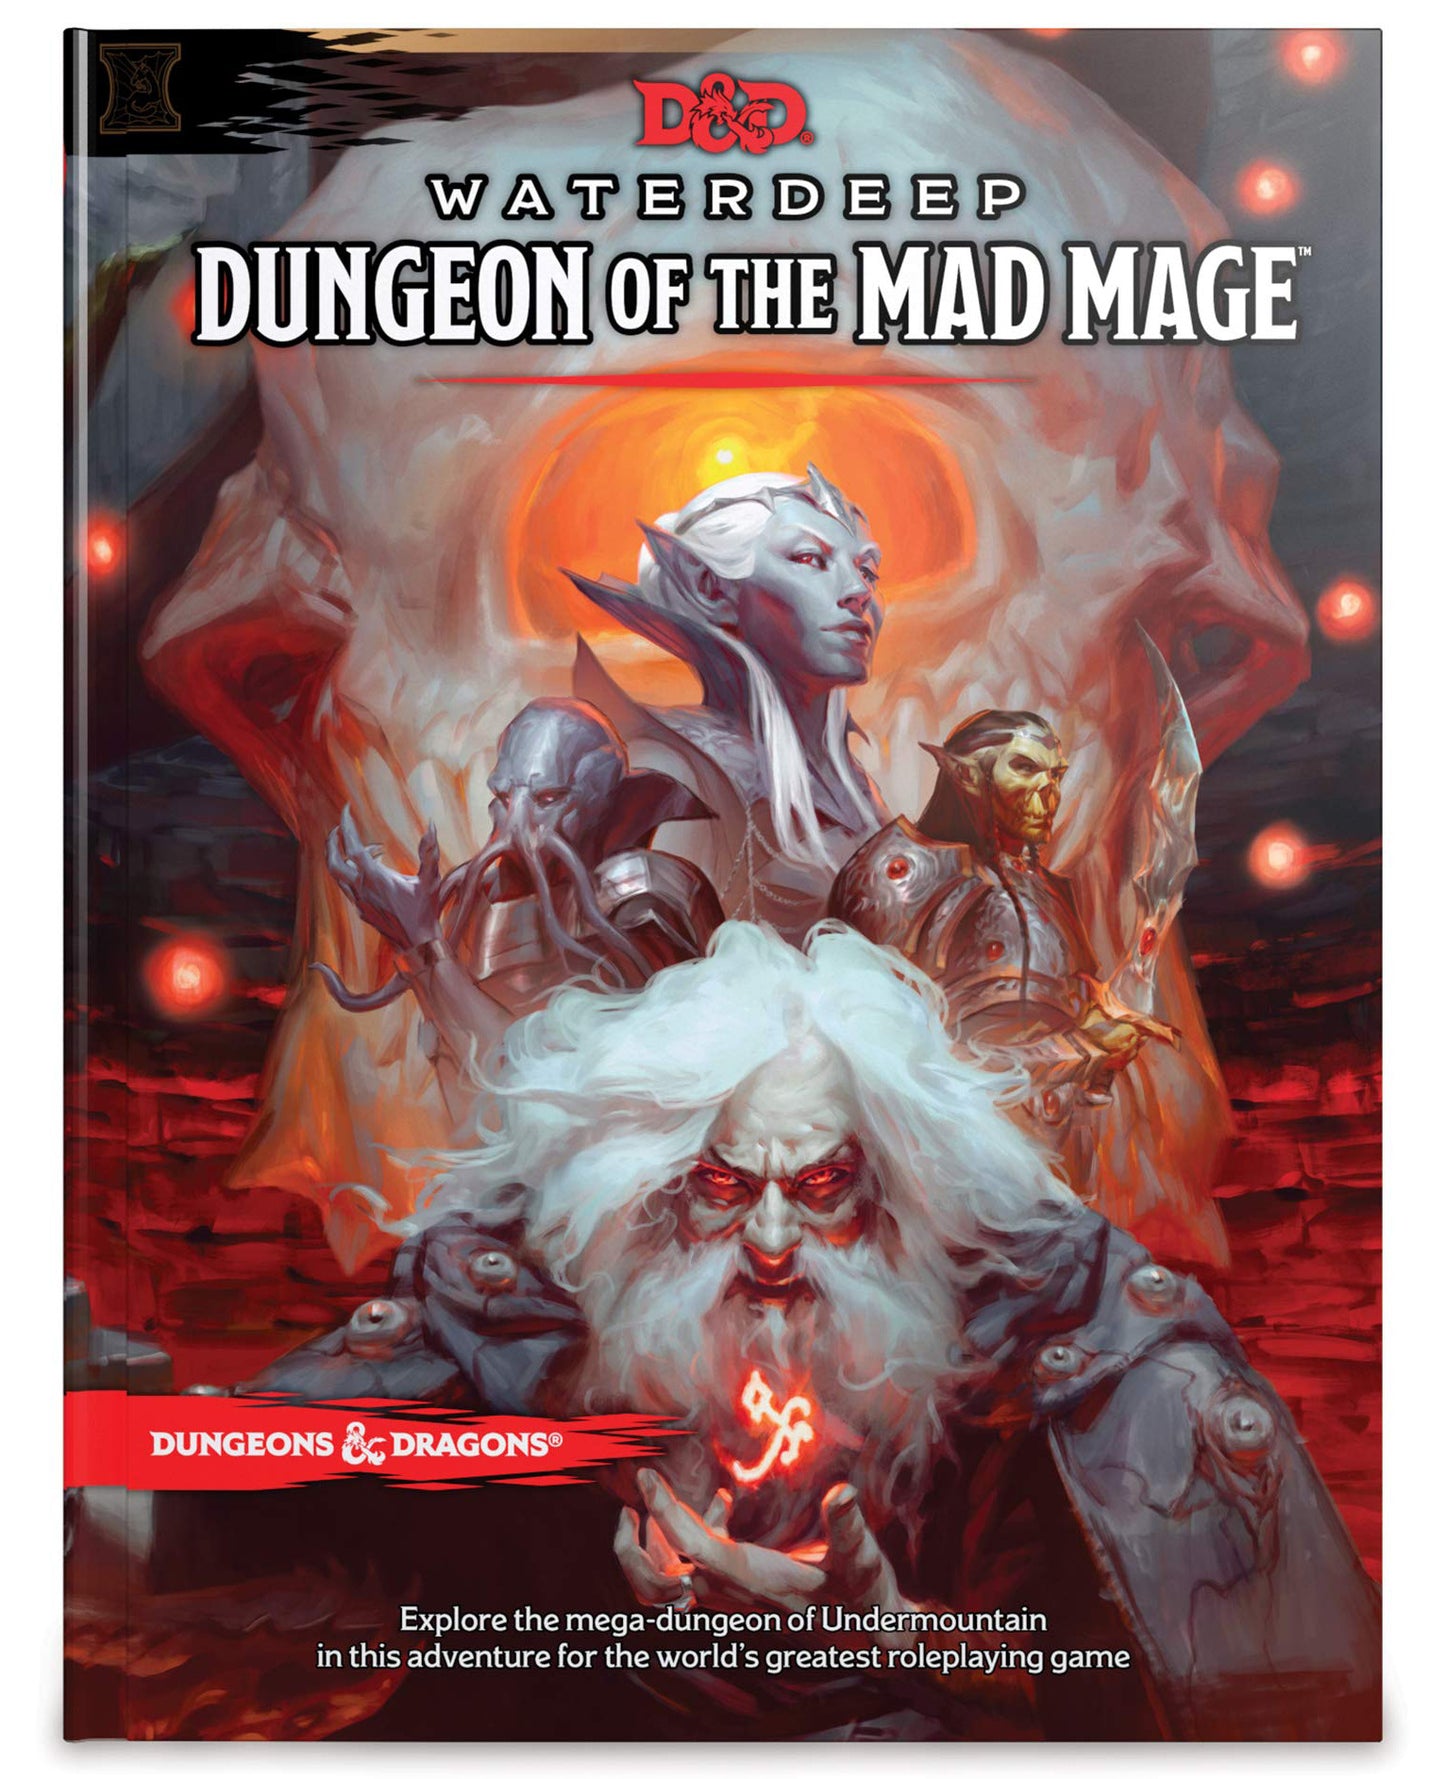 D&D Dungeons & Dragons Waterdeep Dungeon of the Mad Mage Hardcover